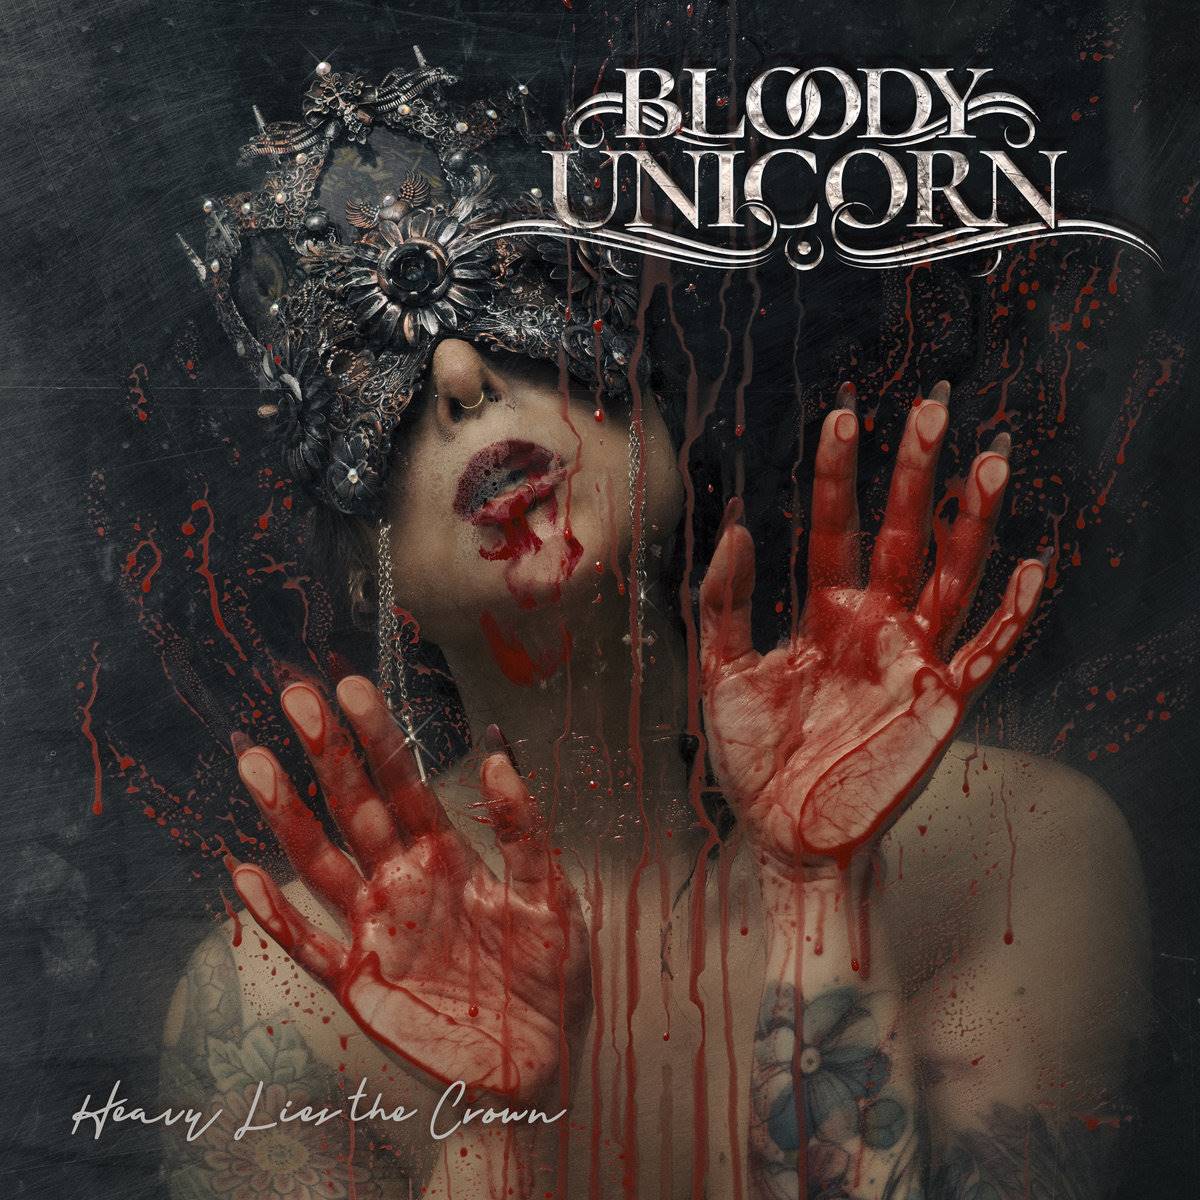 Bloody Unicorn - Heavy Lies the Crown (EP)
Symphonic/Melodic Death Metal from Camposampiero, Italy
Release date: April 8th, 2023

bloodyunicorn.bandcamp.com/music

#deathmetal #BloodyUnicorn #femalevocalist #melodicdeathmetal #symphonicdeathmetal #deathmetalpromotion #newalbum2023